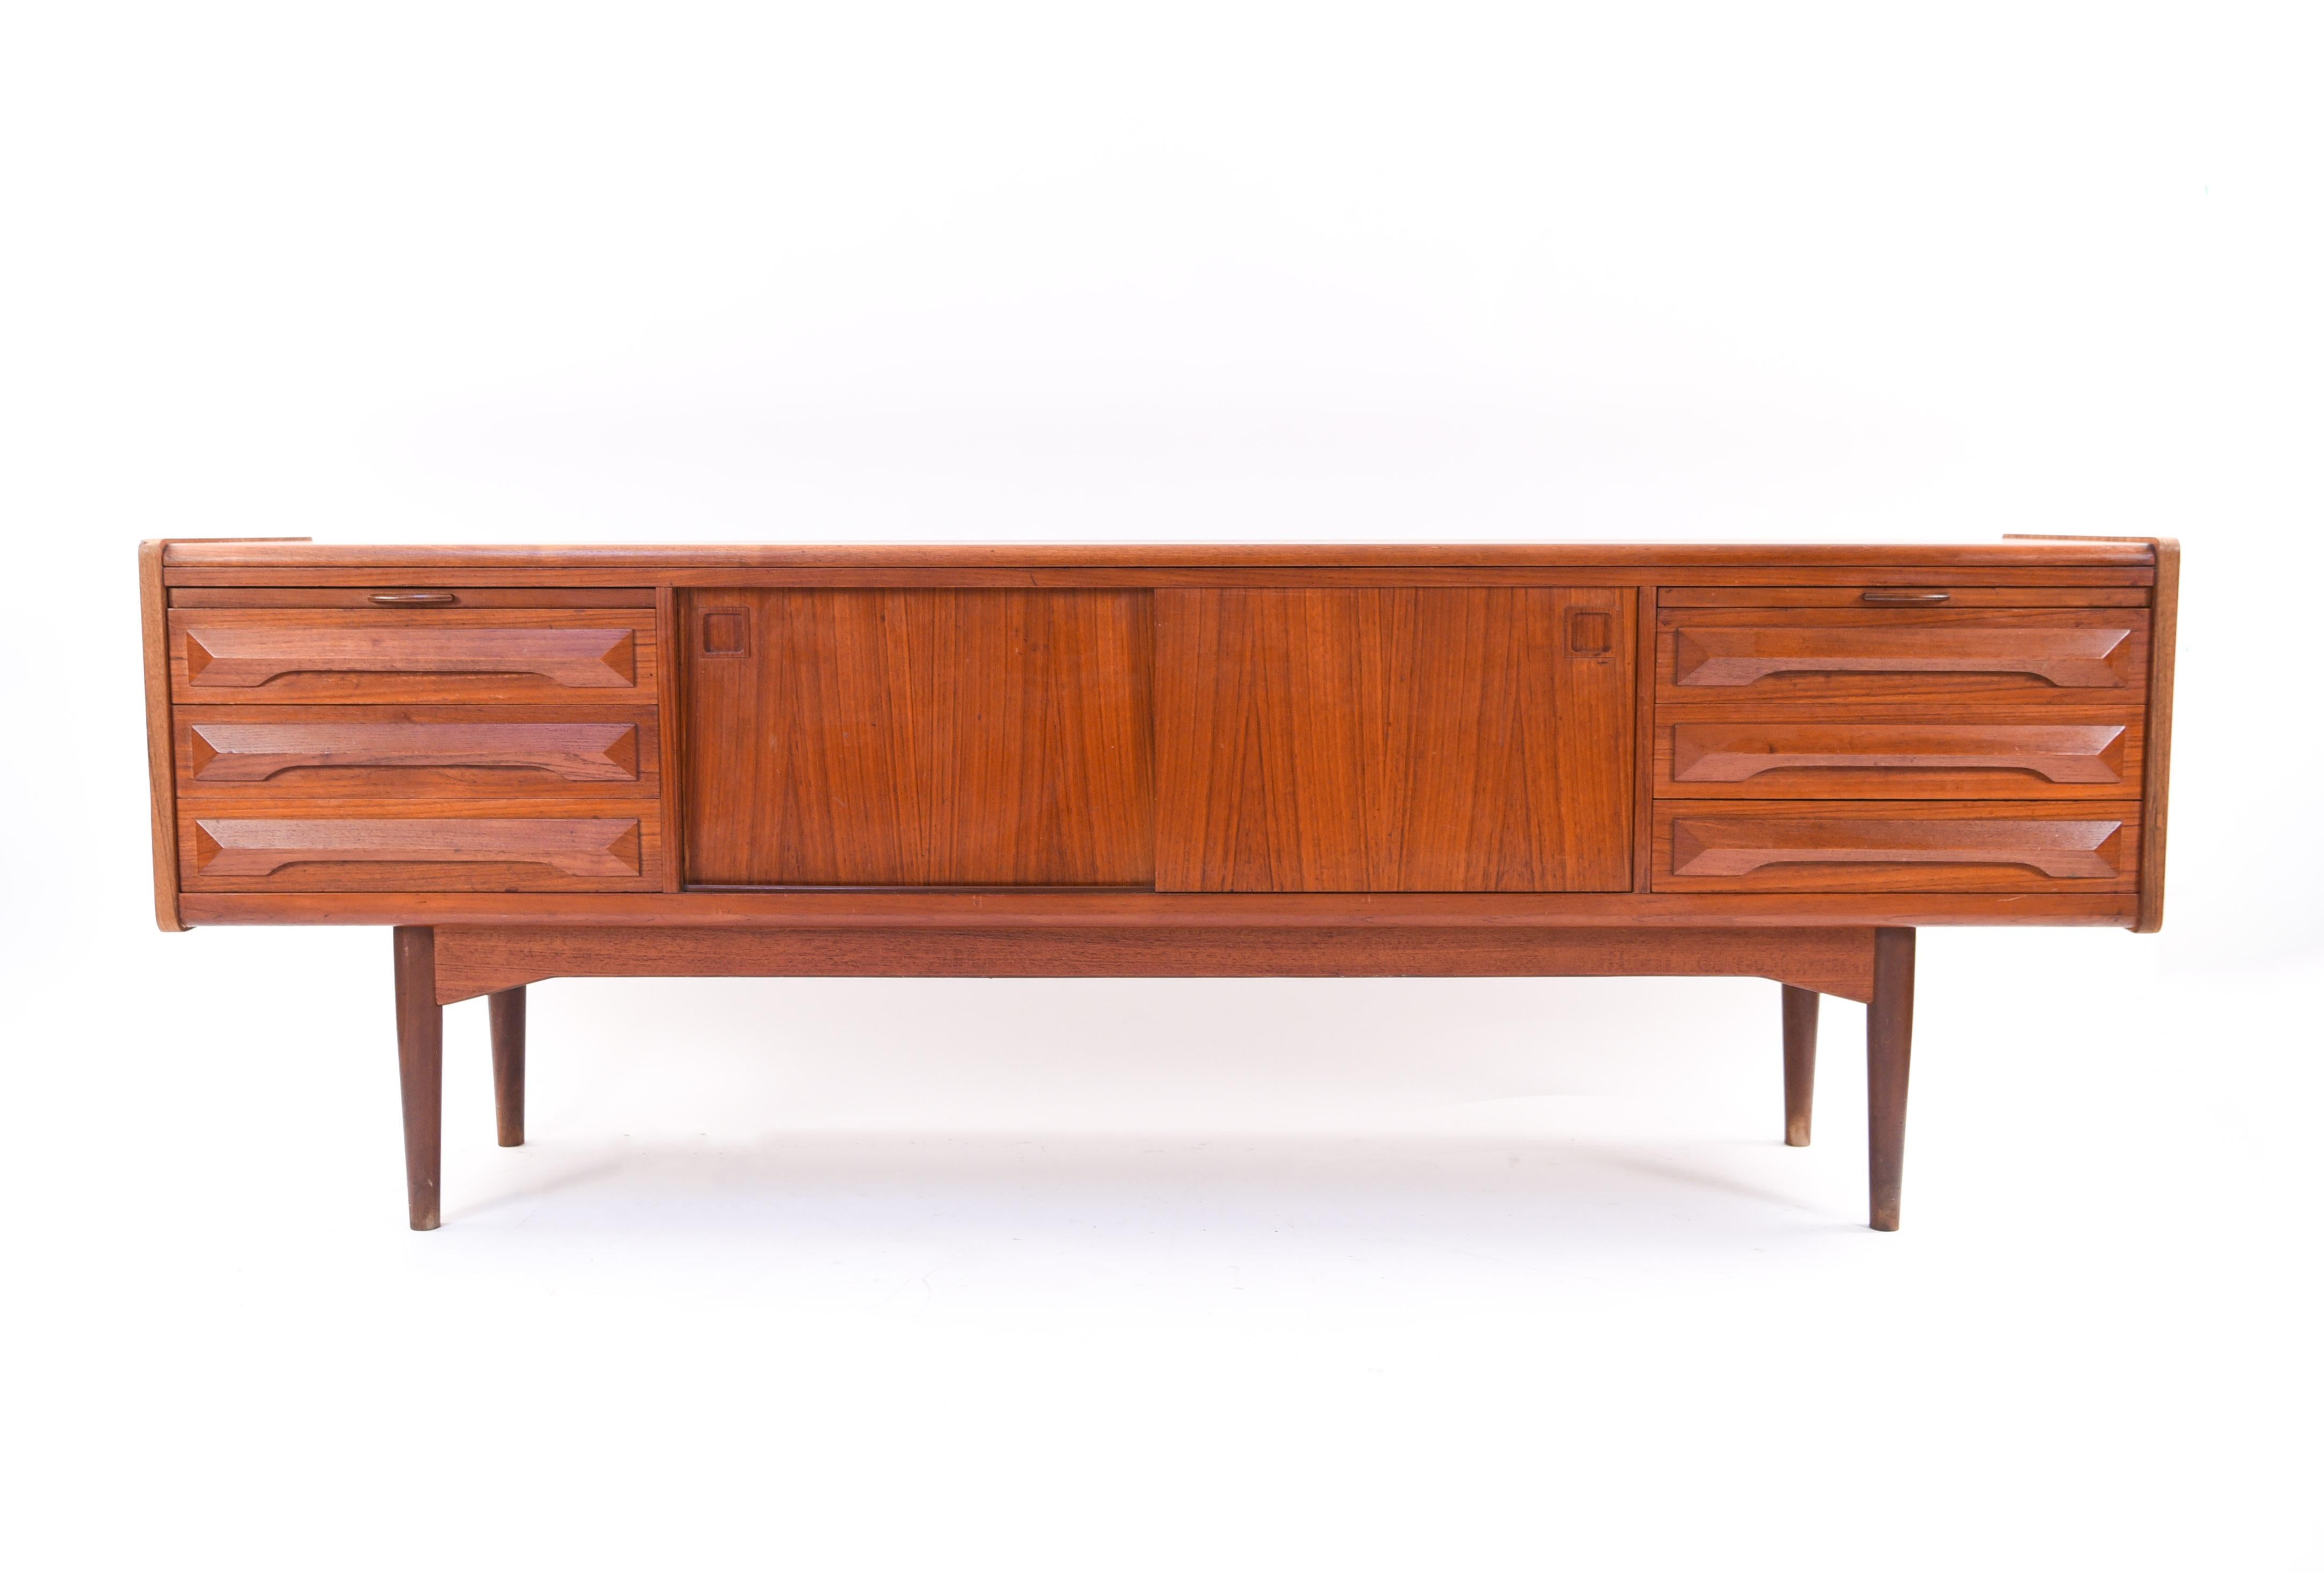 This interesting Danish midcentury teak sideboard was designed by Johannes Andersen in the 1960s and is attributed to Kofod-Larsen as the maker. This piece features the quintessential recessed square cabinet door handles of Andersen's design. The